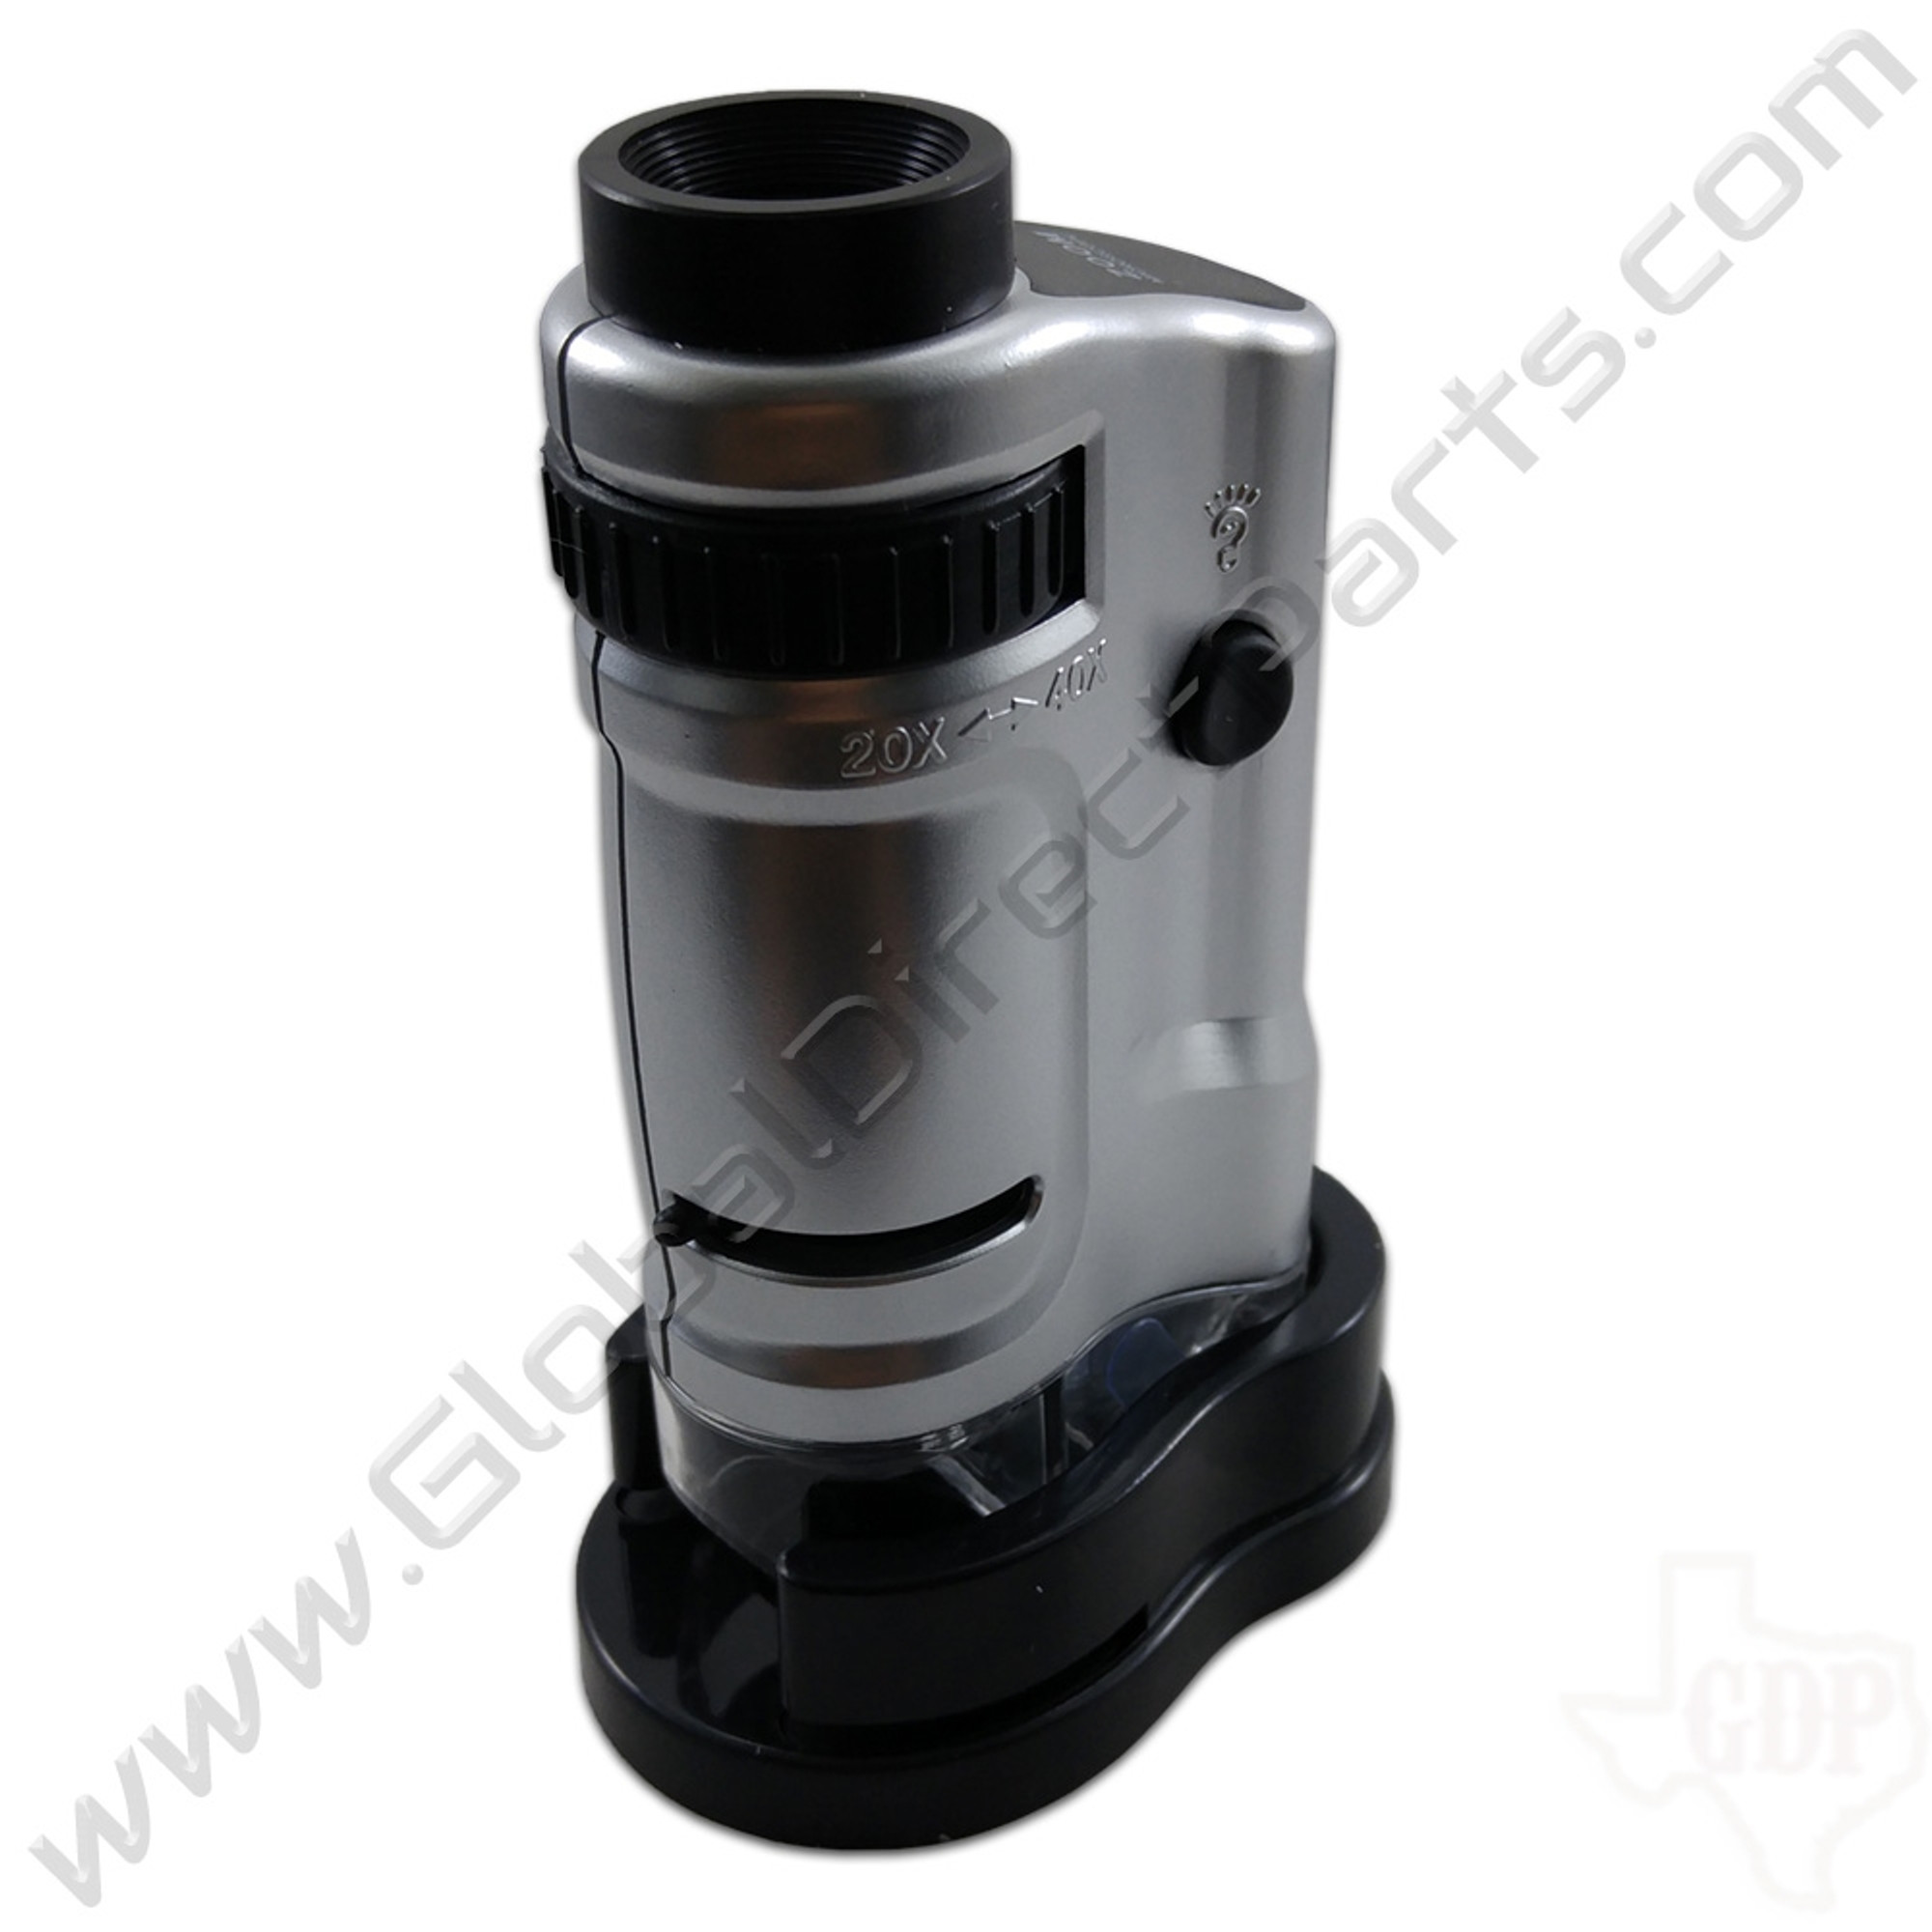 Pocket Microscope - Global Direct Parts